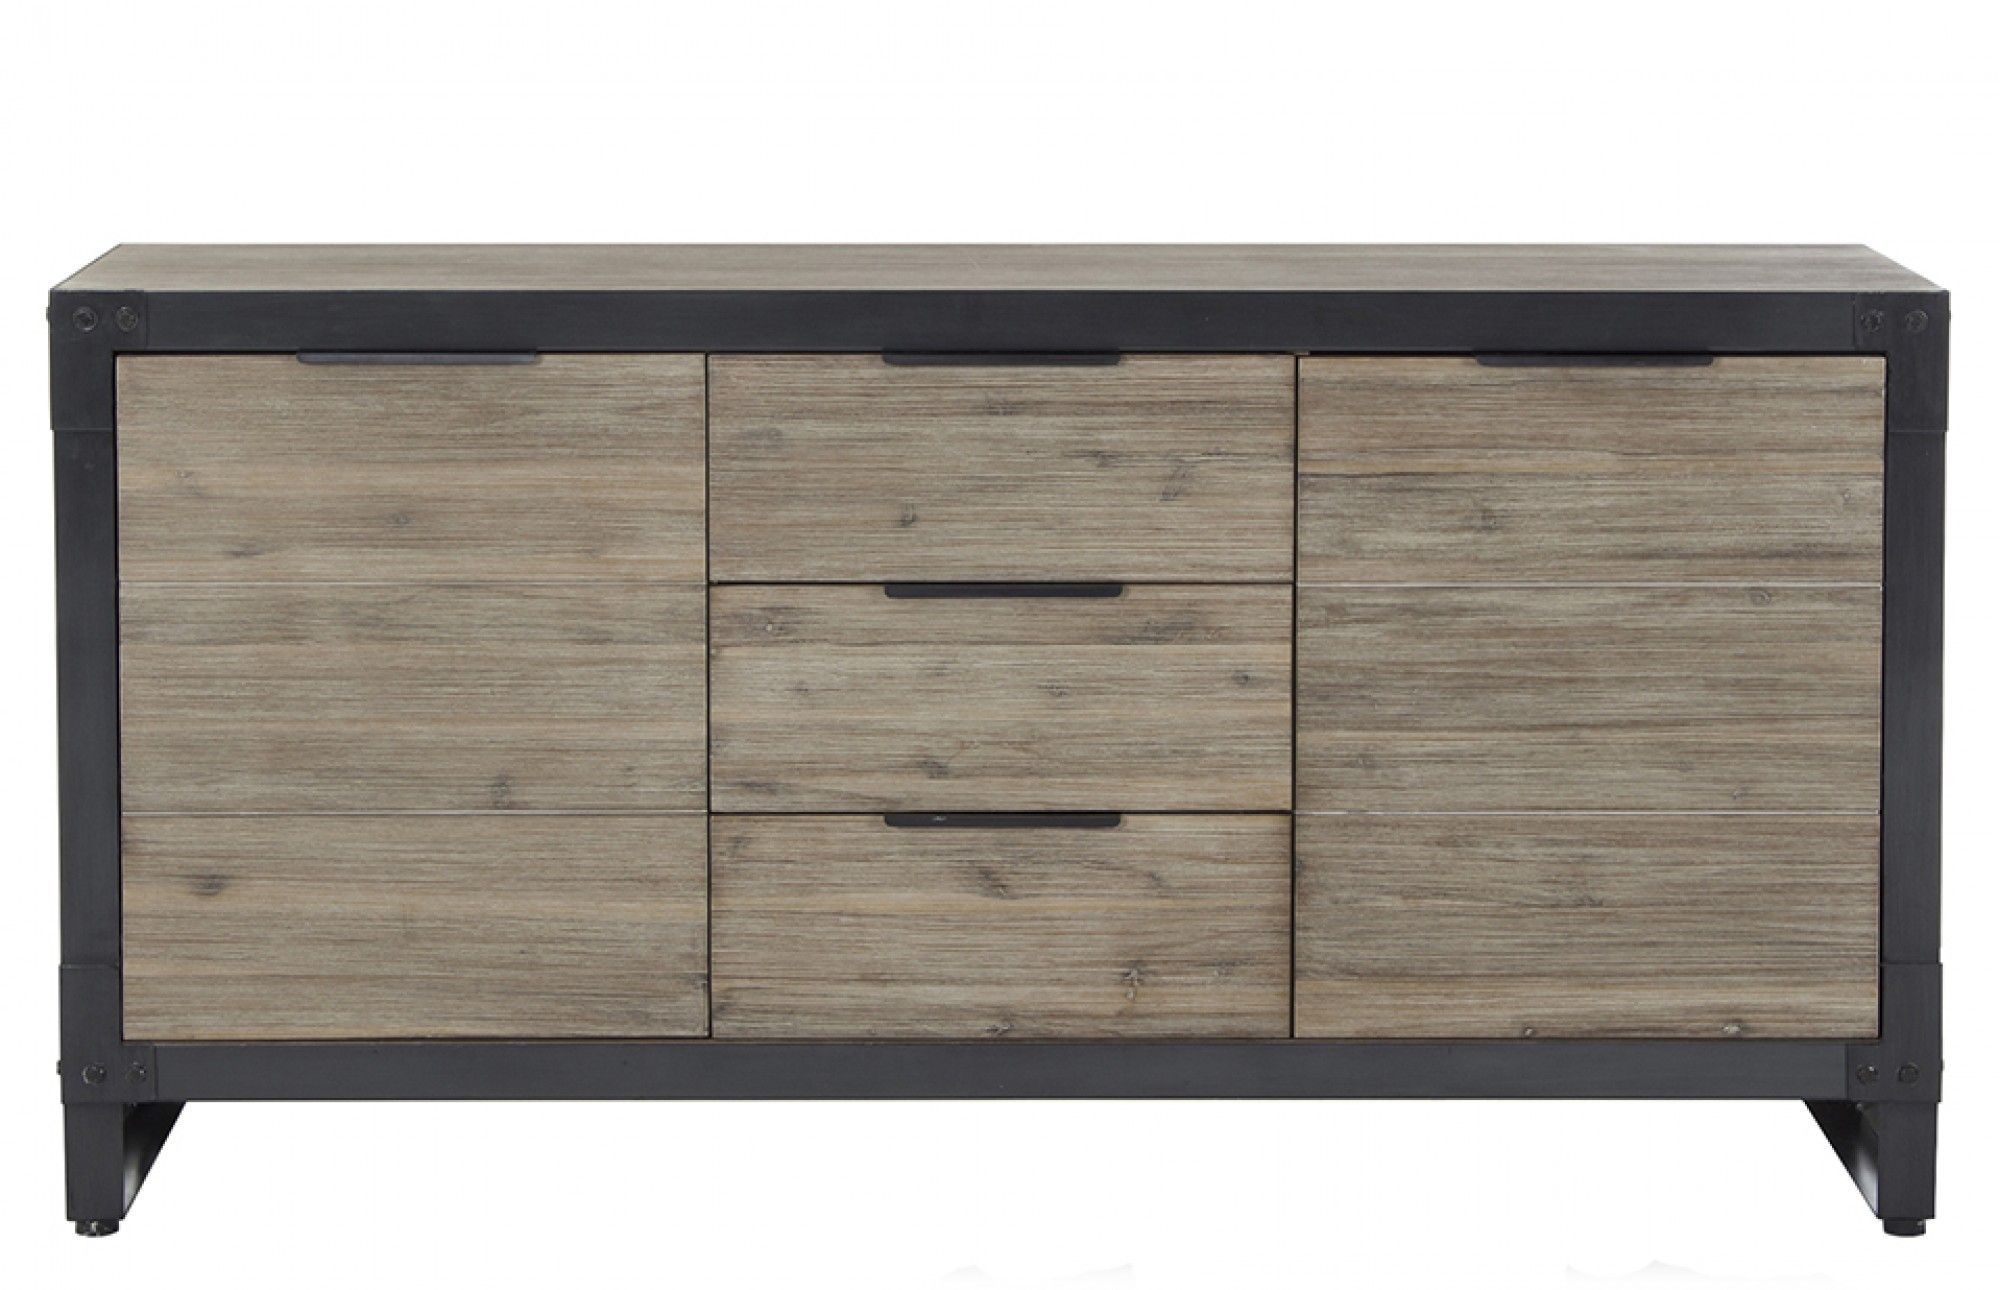 Brunel – Sideboard | Pinterest | Drawers, Hardware And Industrial In Industrial 3 Drawer 3 Door Sideboards (View 17 of 30)